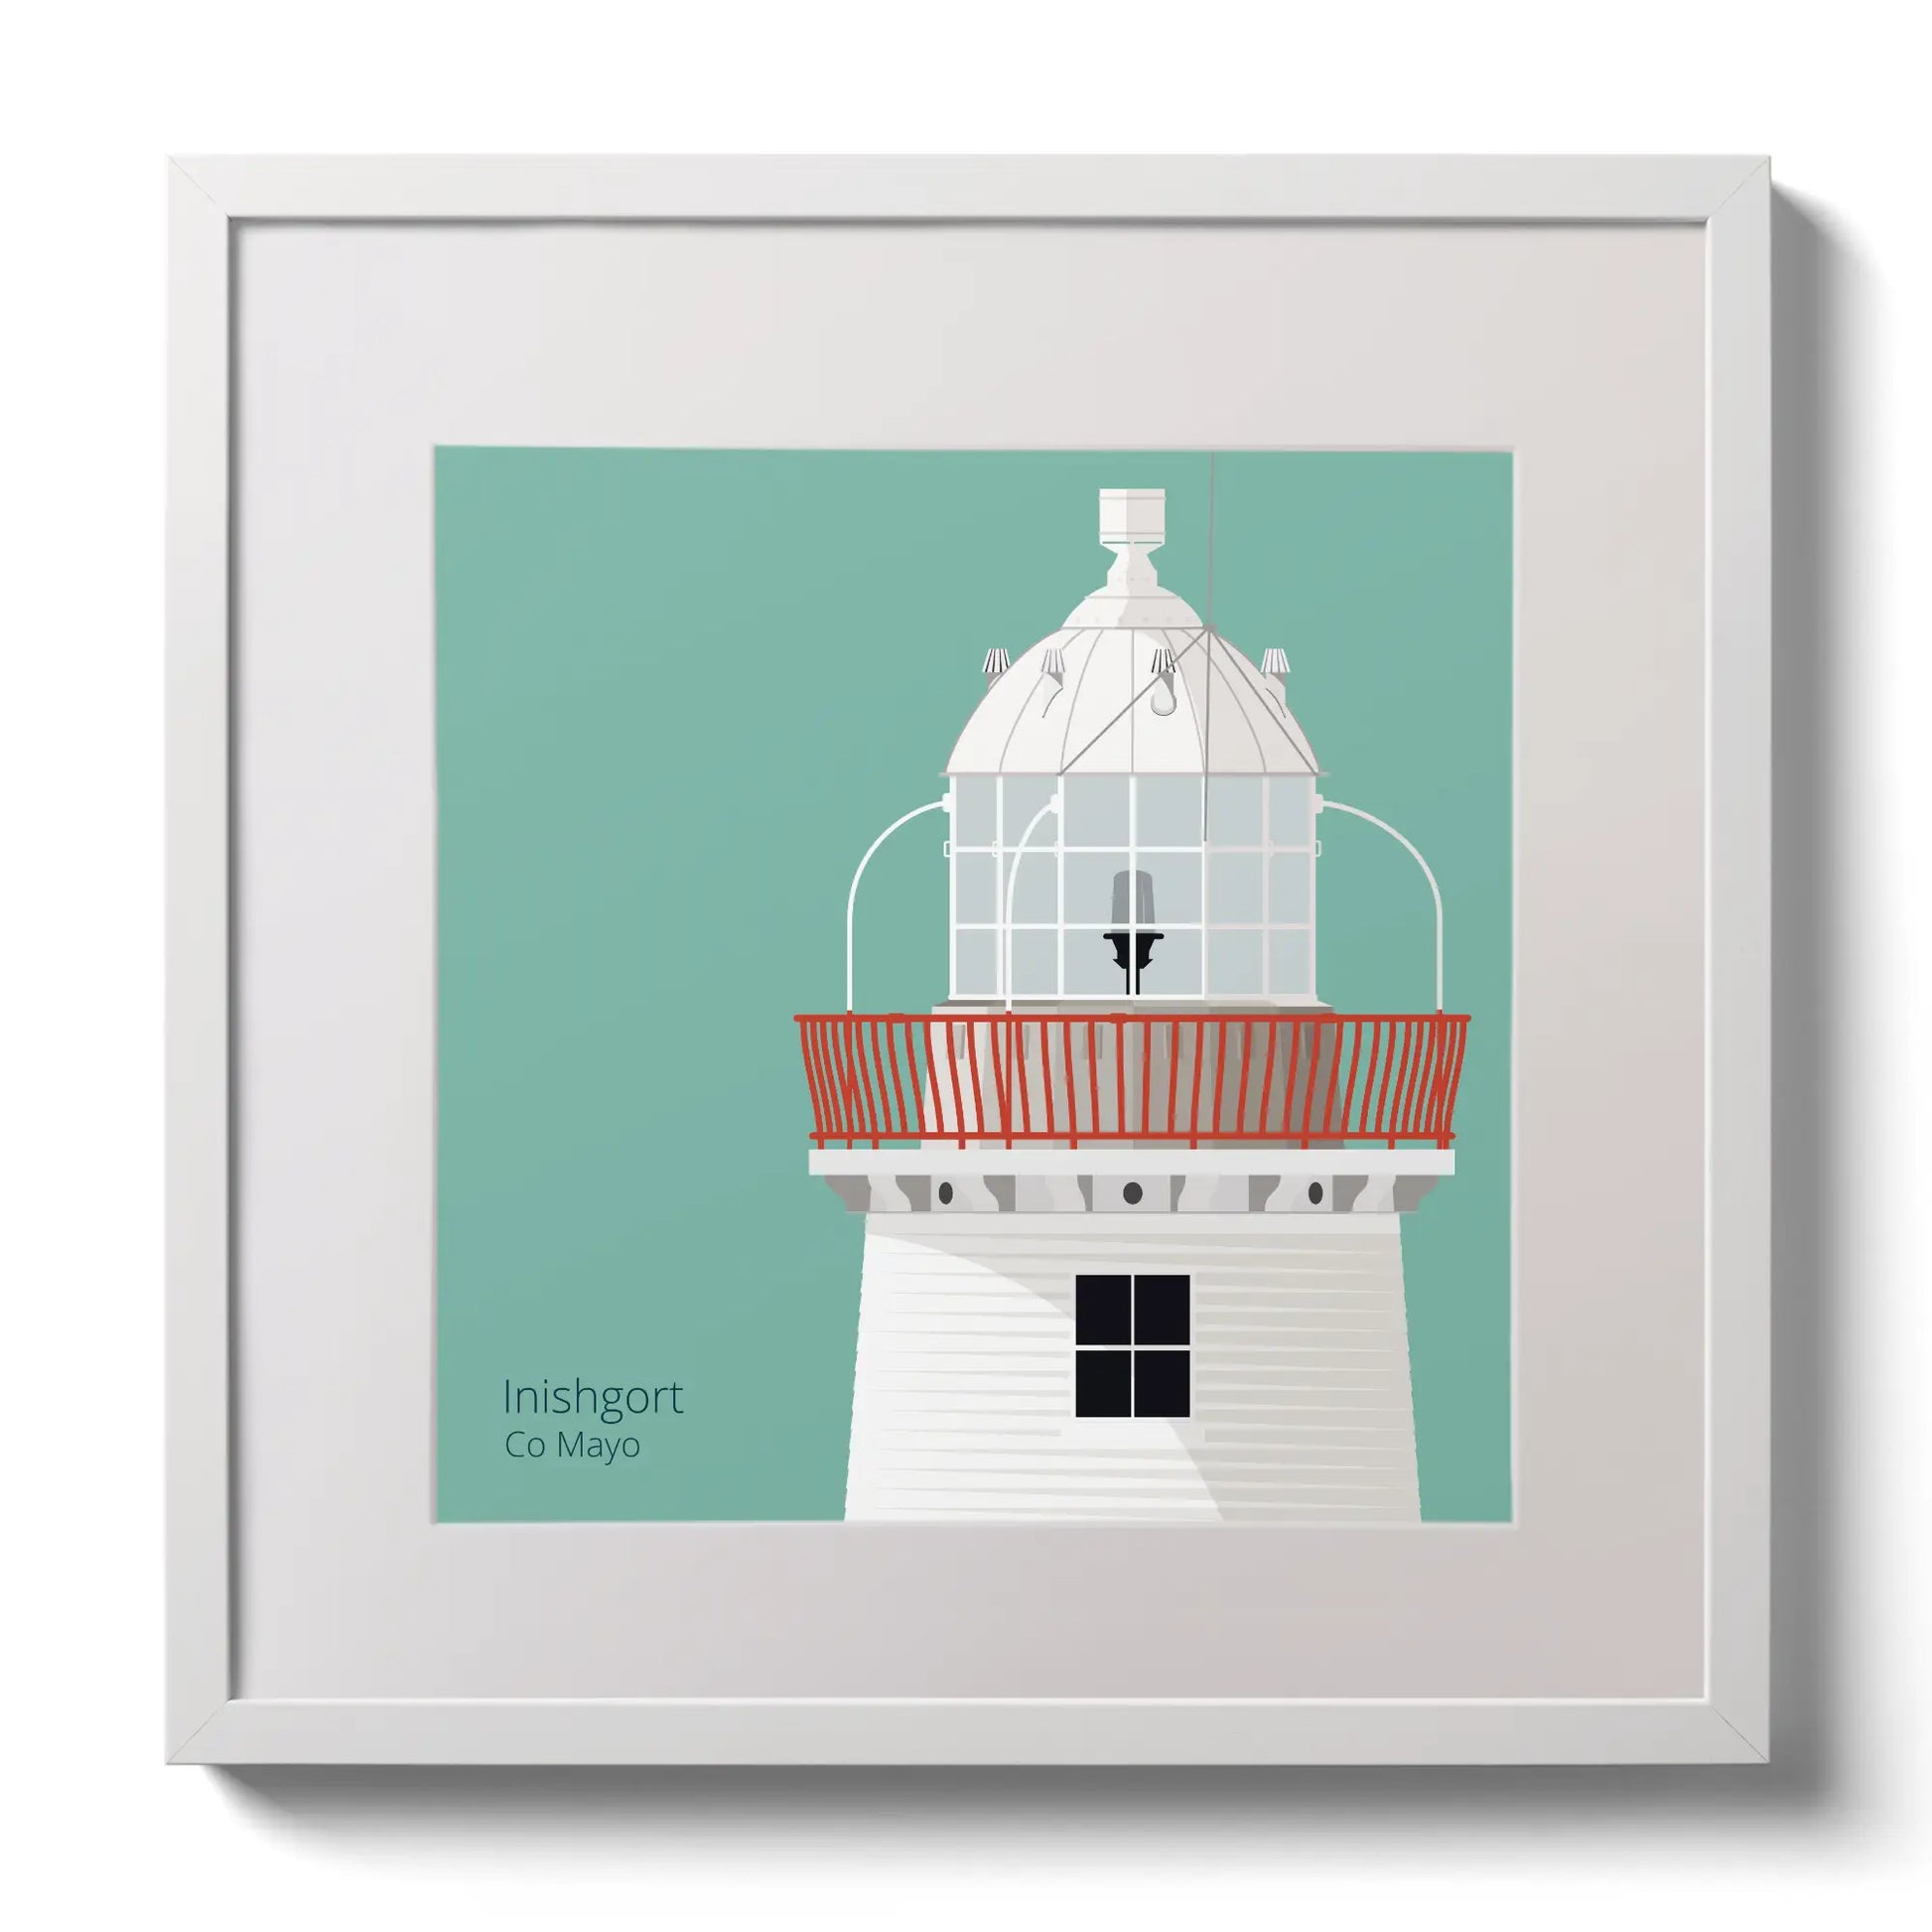 Illustration of Inishgort lighthouse on an ocean green background,  in a white square frame measuring 30x30cm.